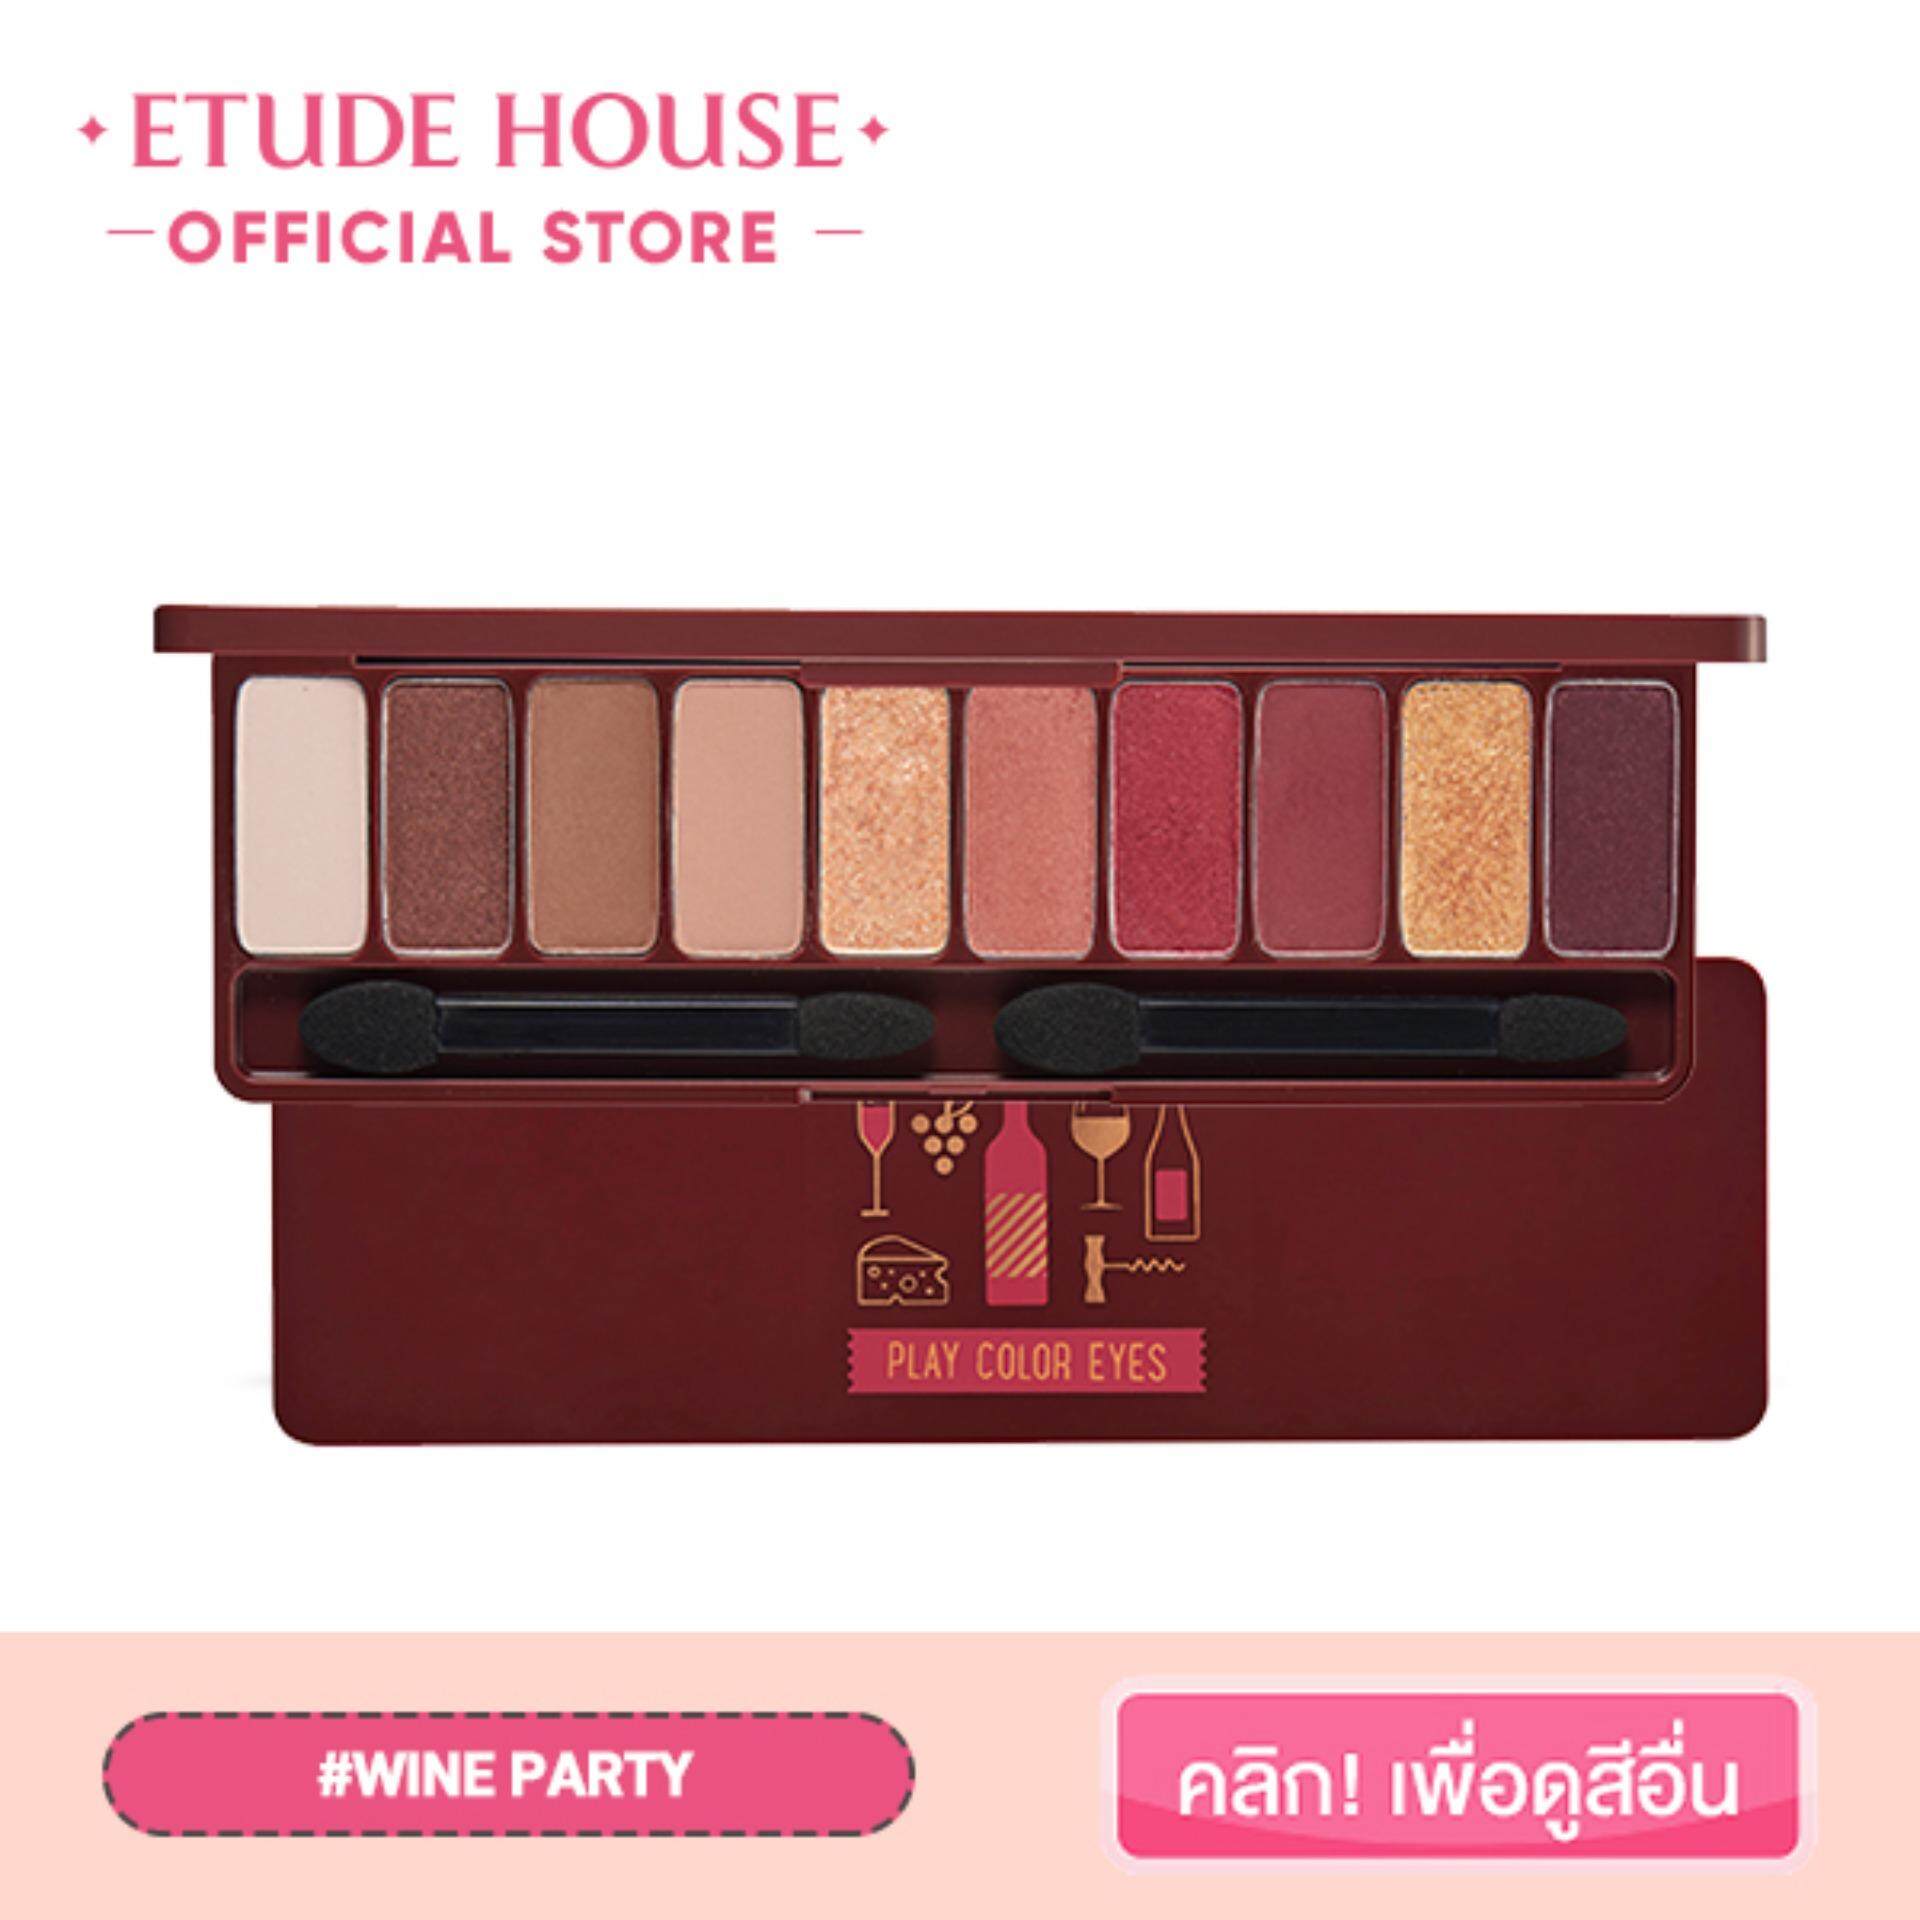 ETUDE HOUSE Play Color Eyes #Wine Party (1 g x 10 colors)